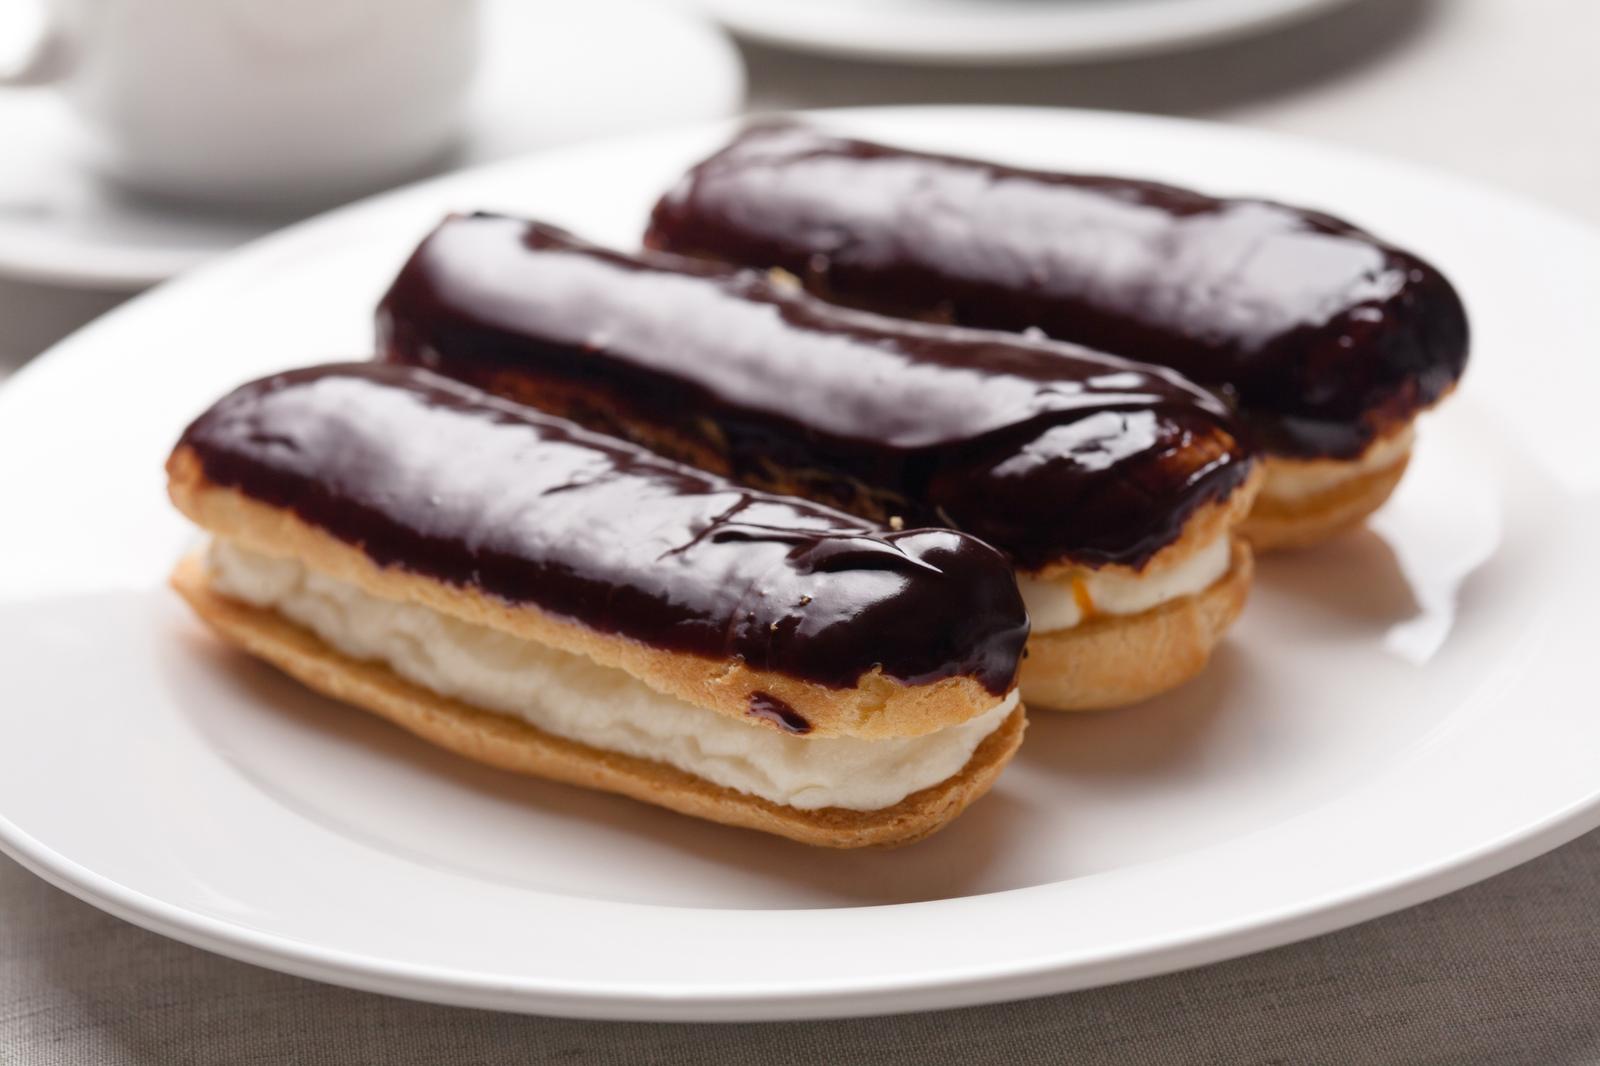 This Picture Quiz Will Challenge Your Knowledge of Classic French Desserts 🥐 – Can You Score High? Eclairs